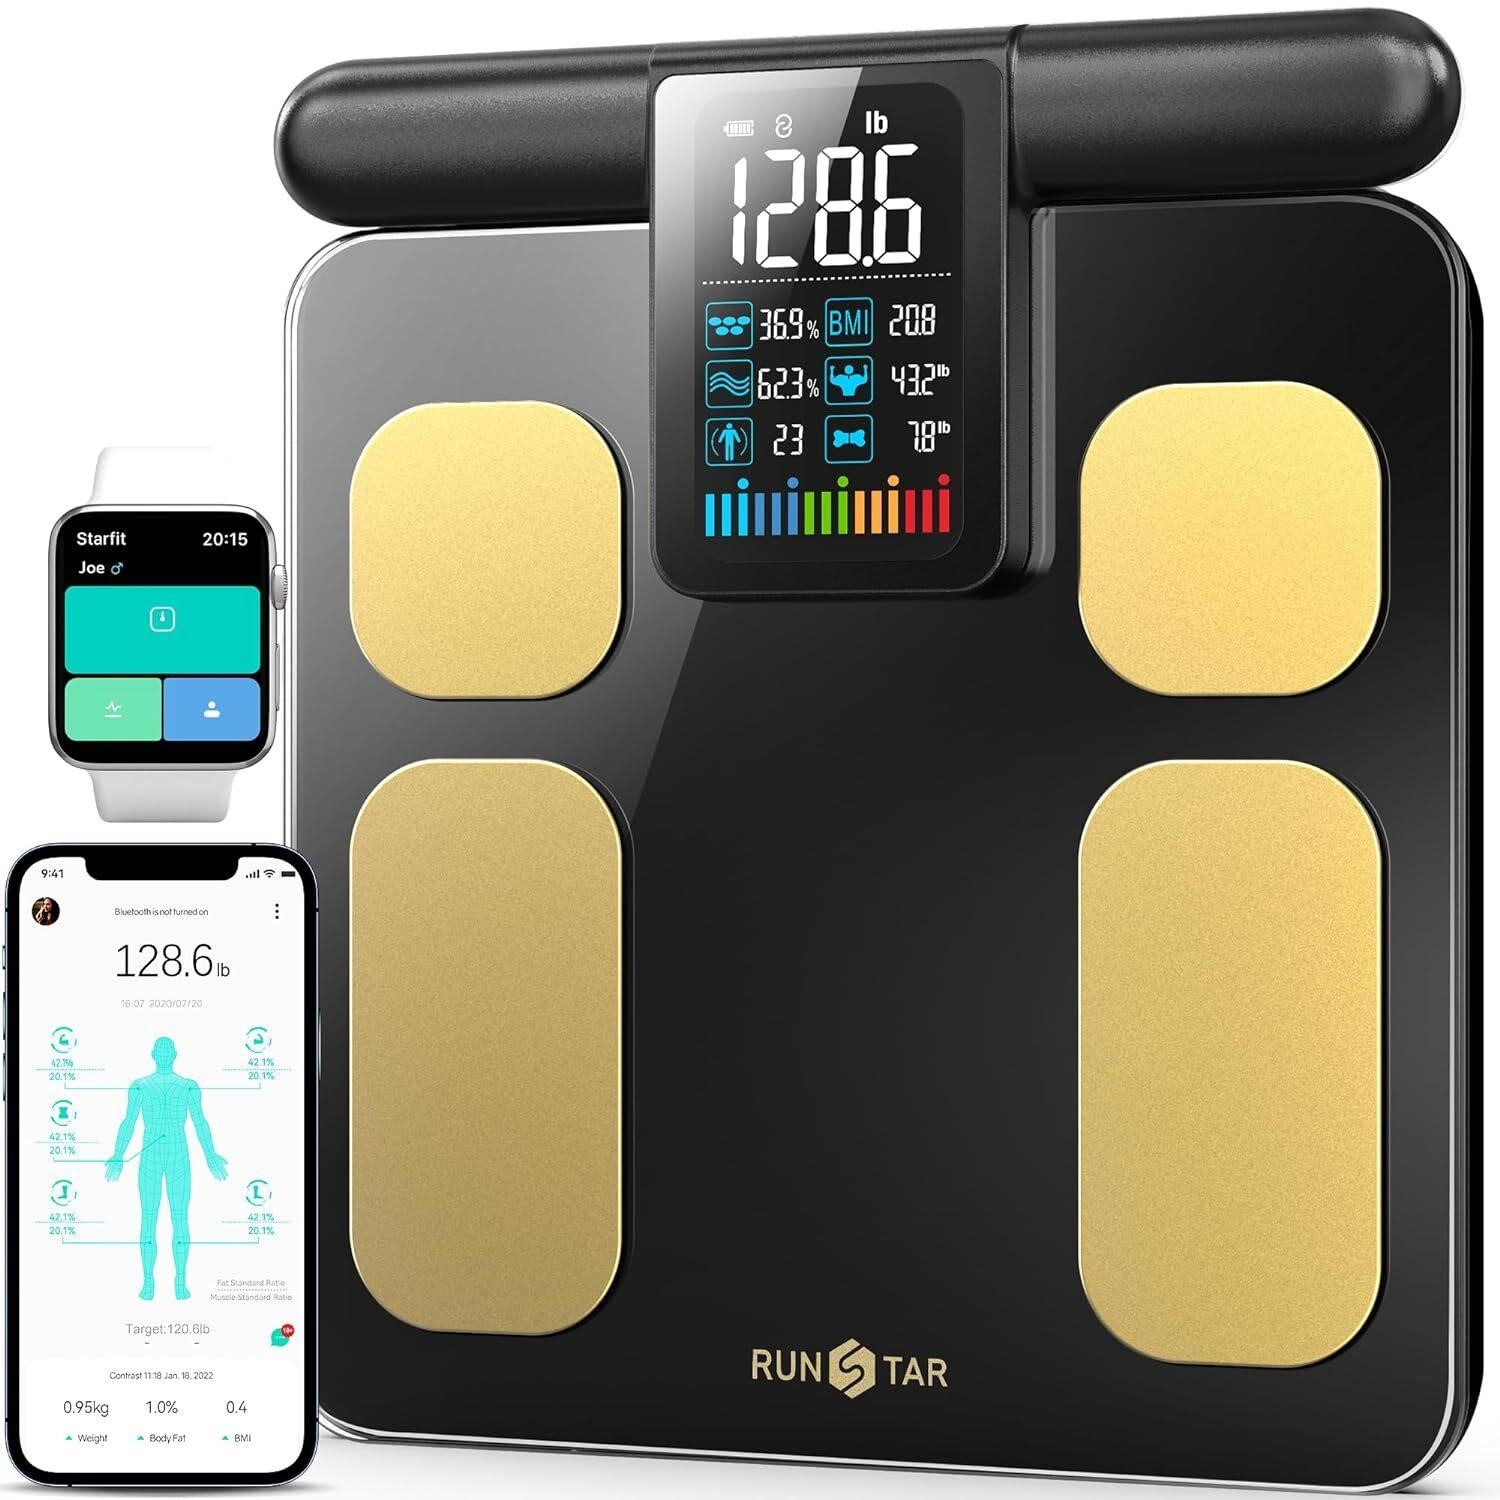 $135  Scale for Body Weight and Fat Percentage